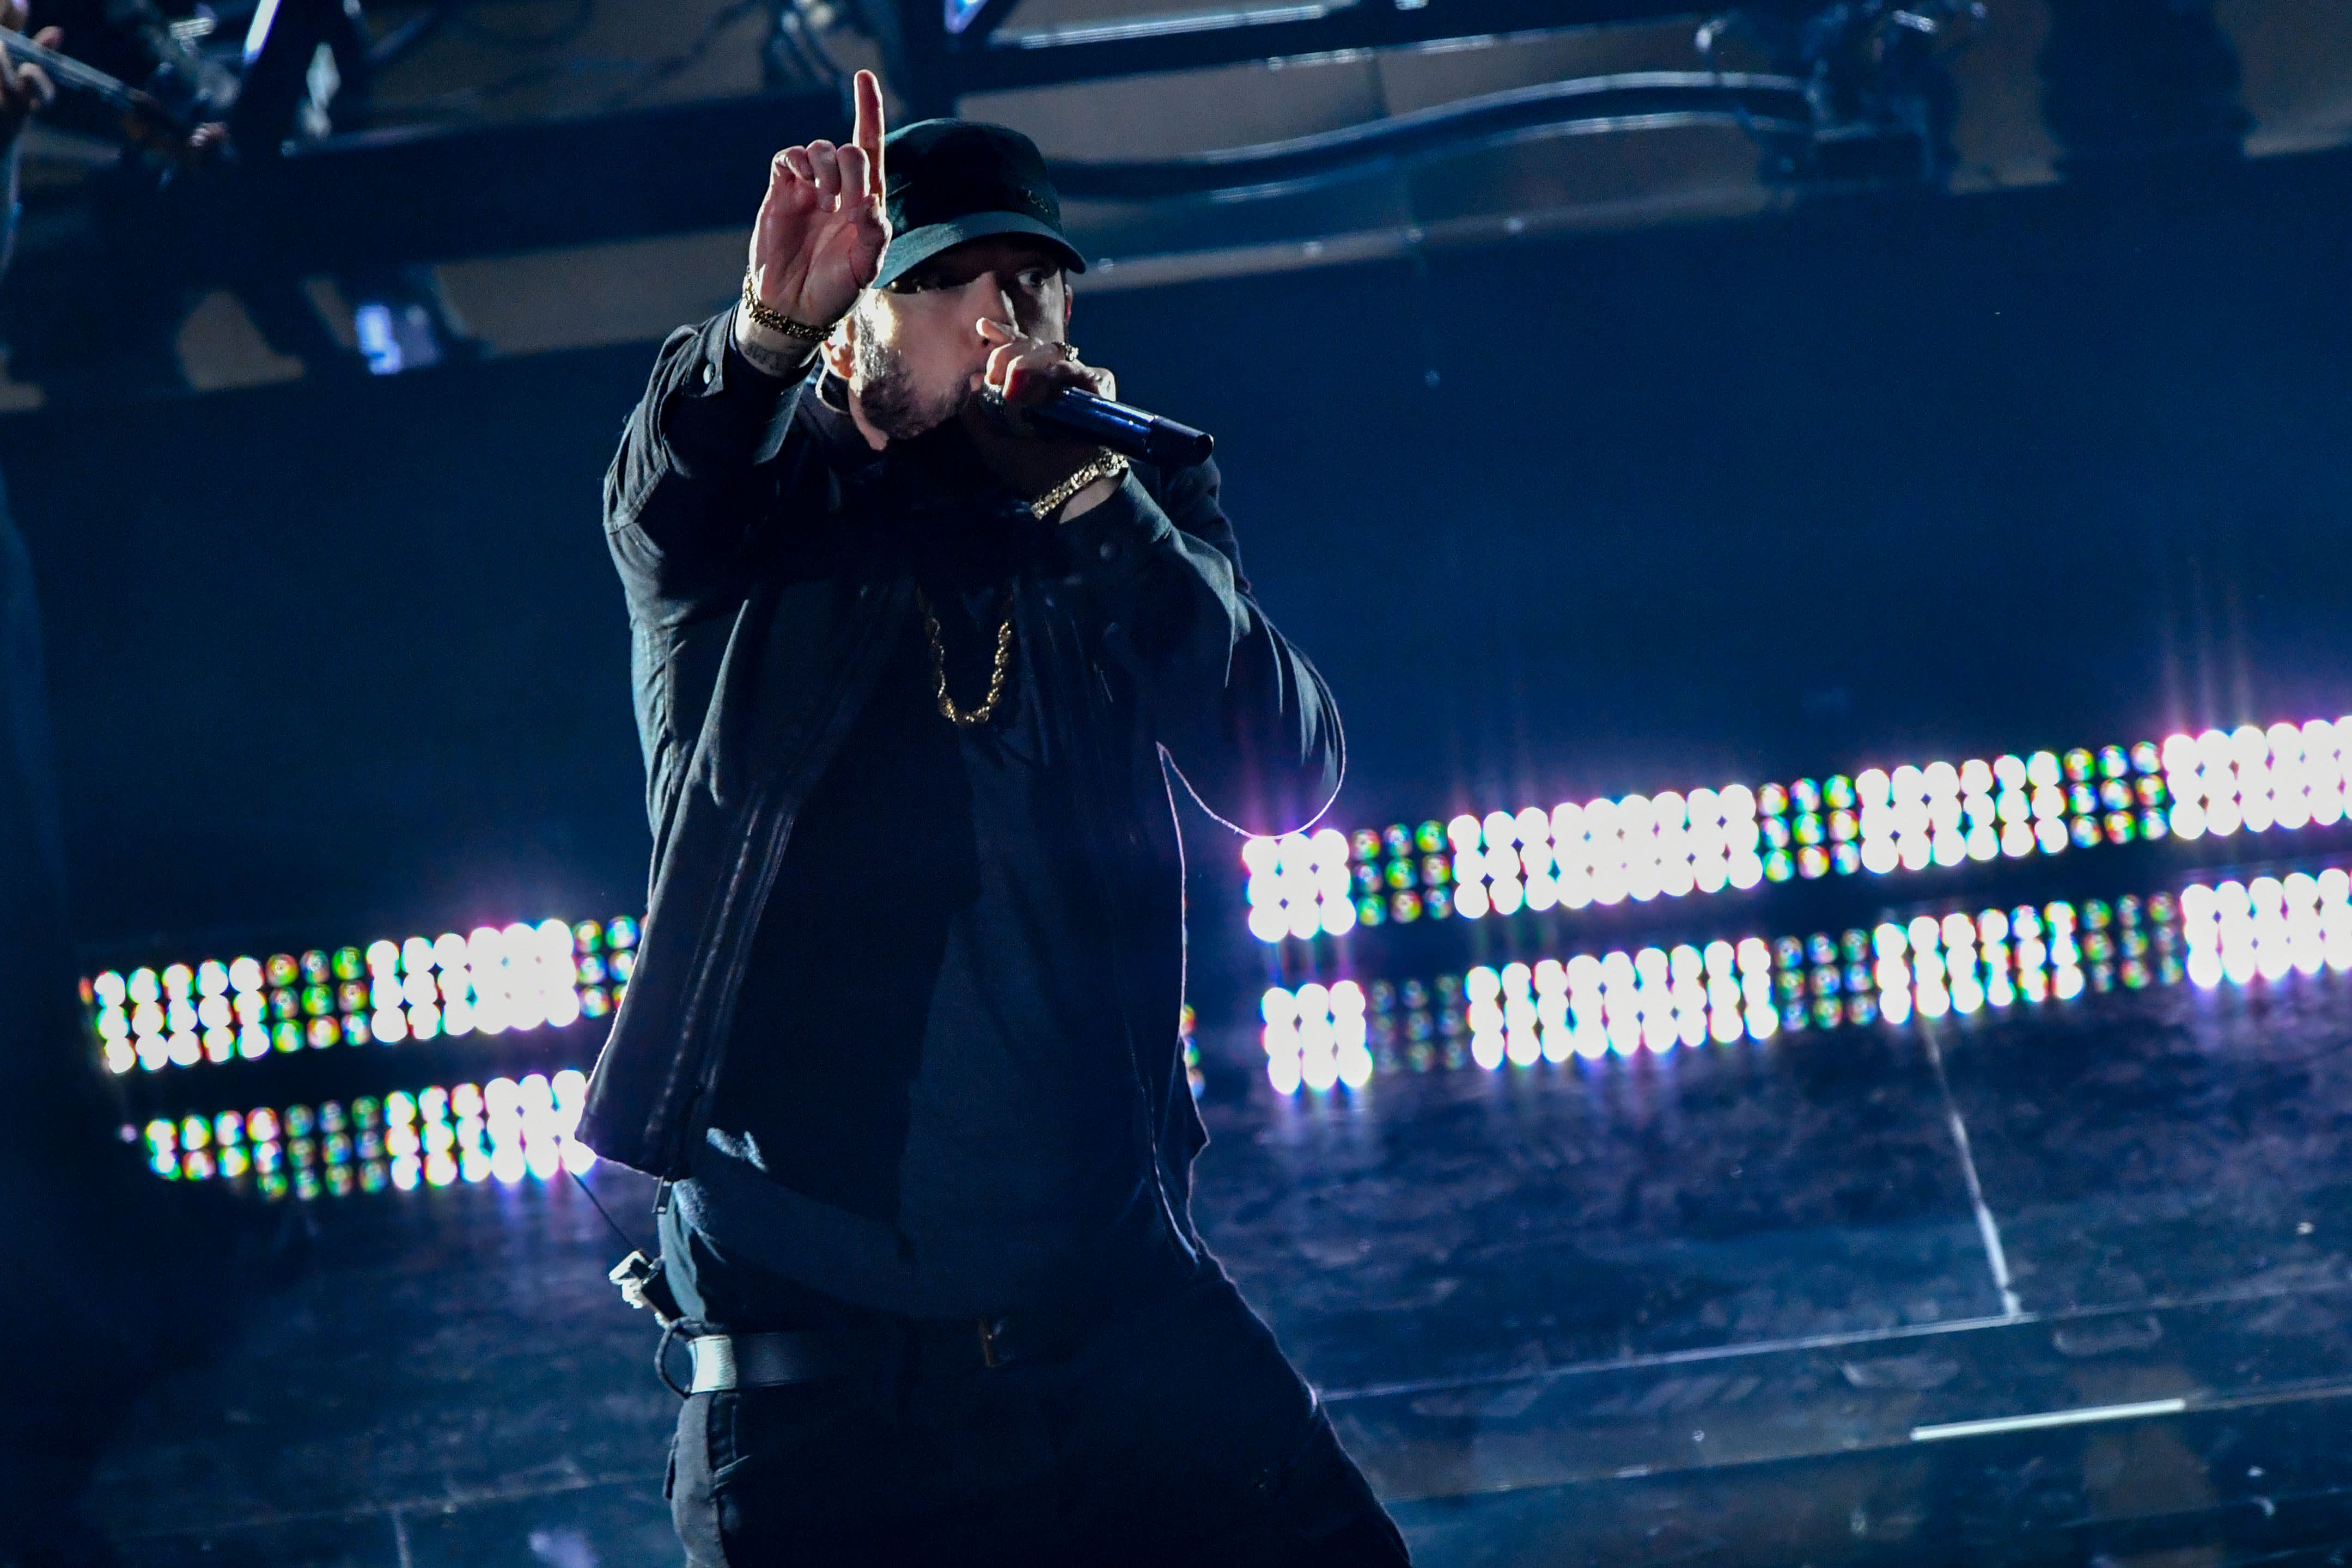 Oscars 2020 Eminem Surprises With Performance Of Lose Yourself